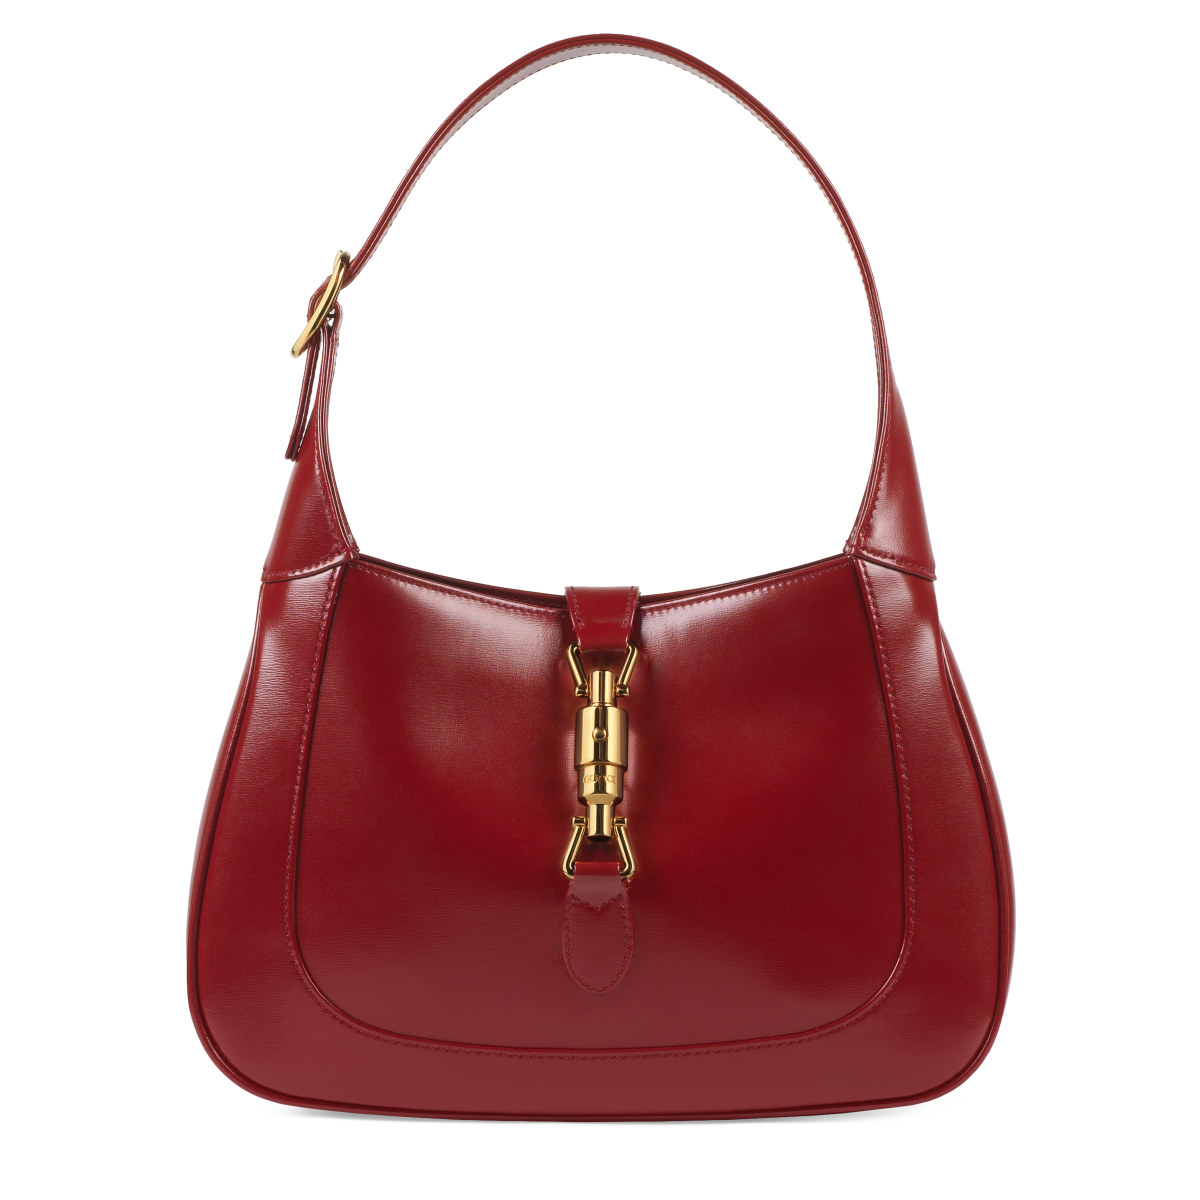 Gucci Presents The Latest Styles From The Signature Handbag Line Jackie 1961